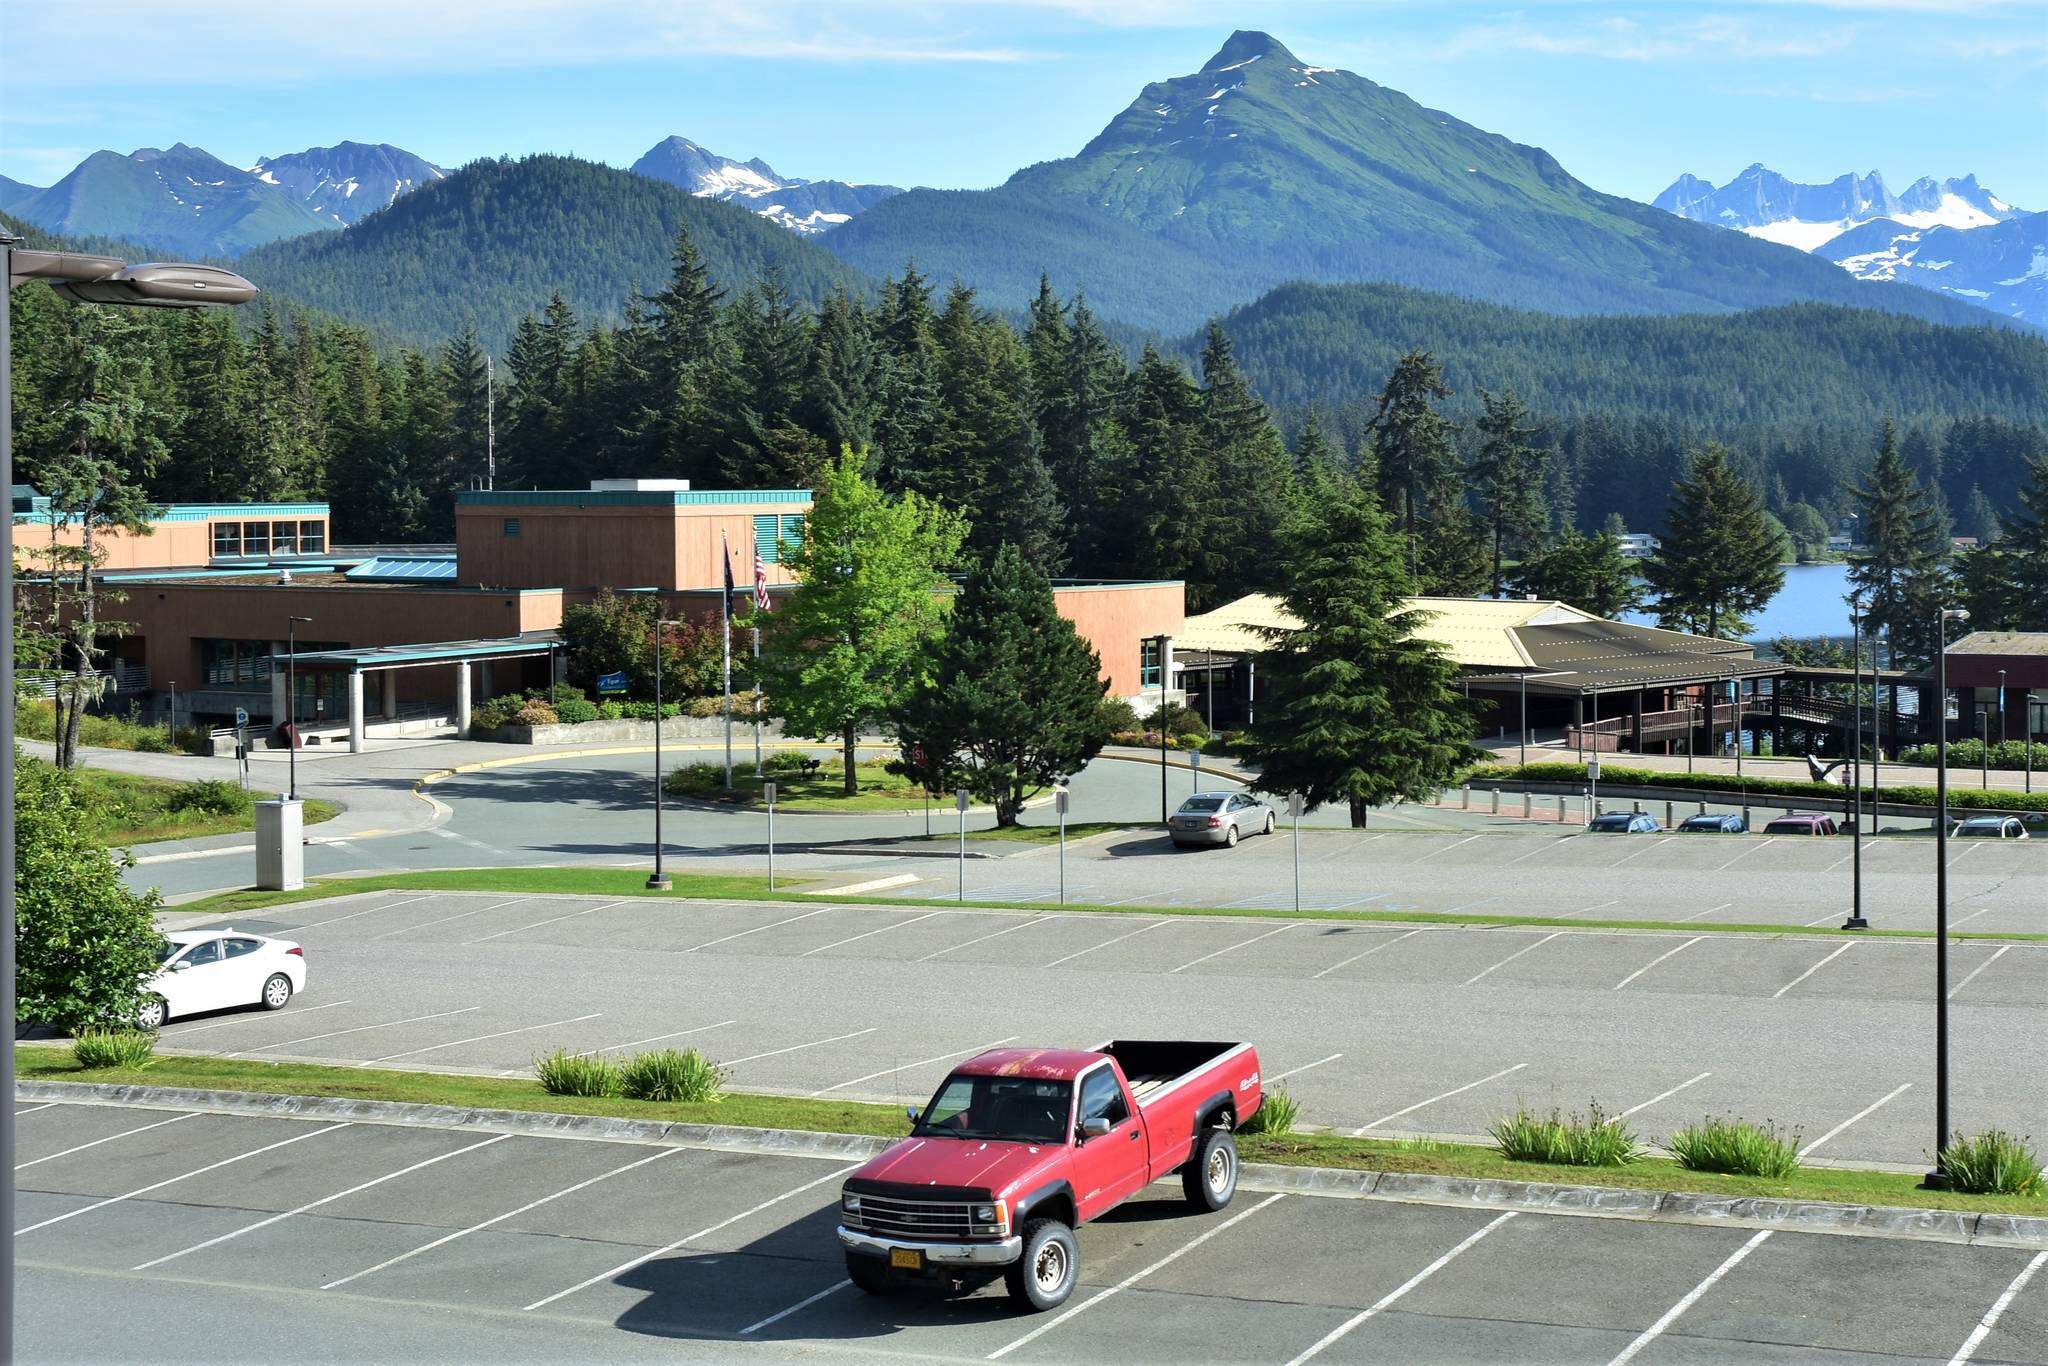 This photo shows the Juneau campus of the University of Alaska Southeast on Friday, July 31, 2020. Classes start Aug. 24 but enrollment is down as both the University of Alaska and UAS have taken financial hits in the past year. Still, university officials say they’re eager to begin the new semester. (Peter Segall / Juneau Empire)